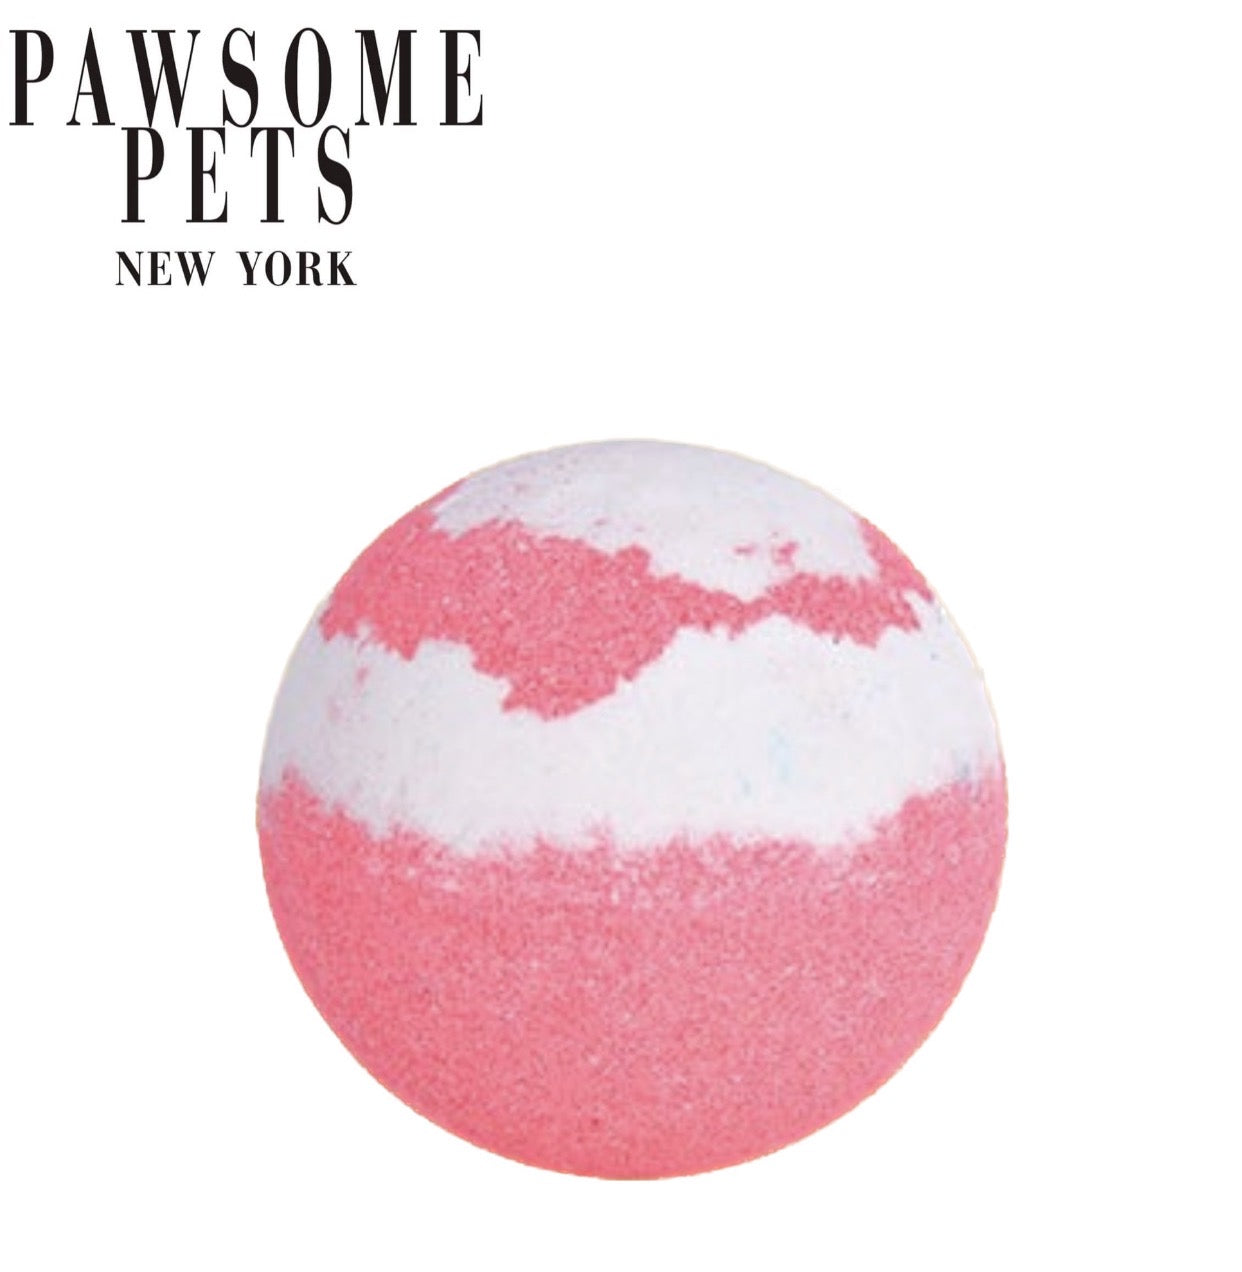 BATH BOMBS FOR DOGS - SLOW & PLUM BLOSSOM(COCONUT)